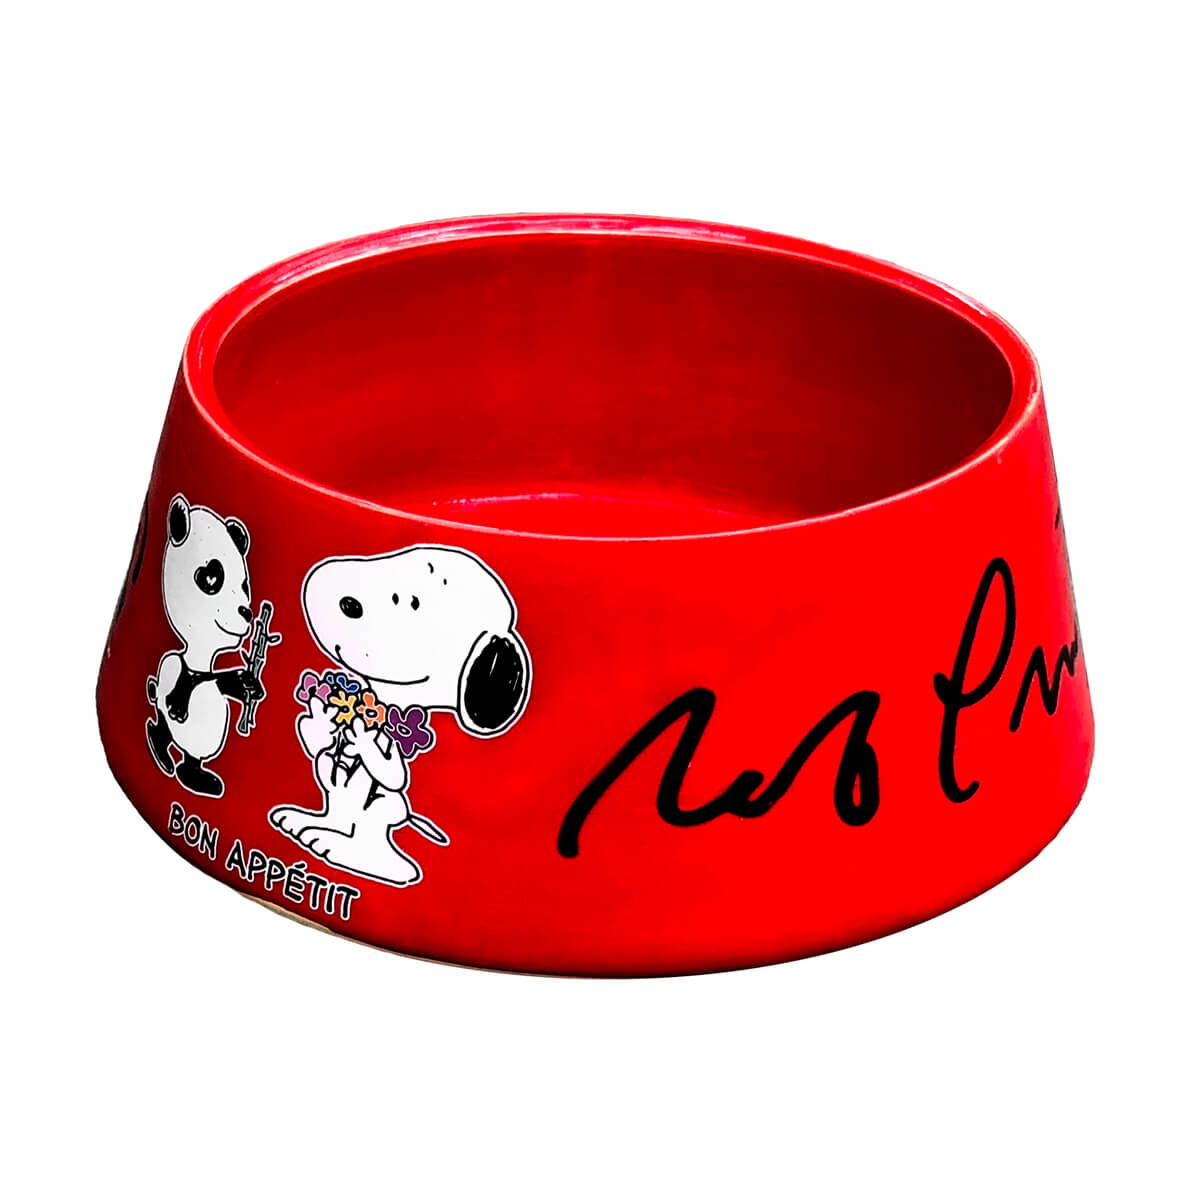 A red dog bowl.